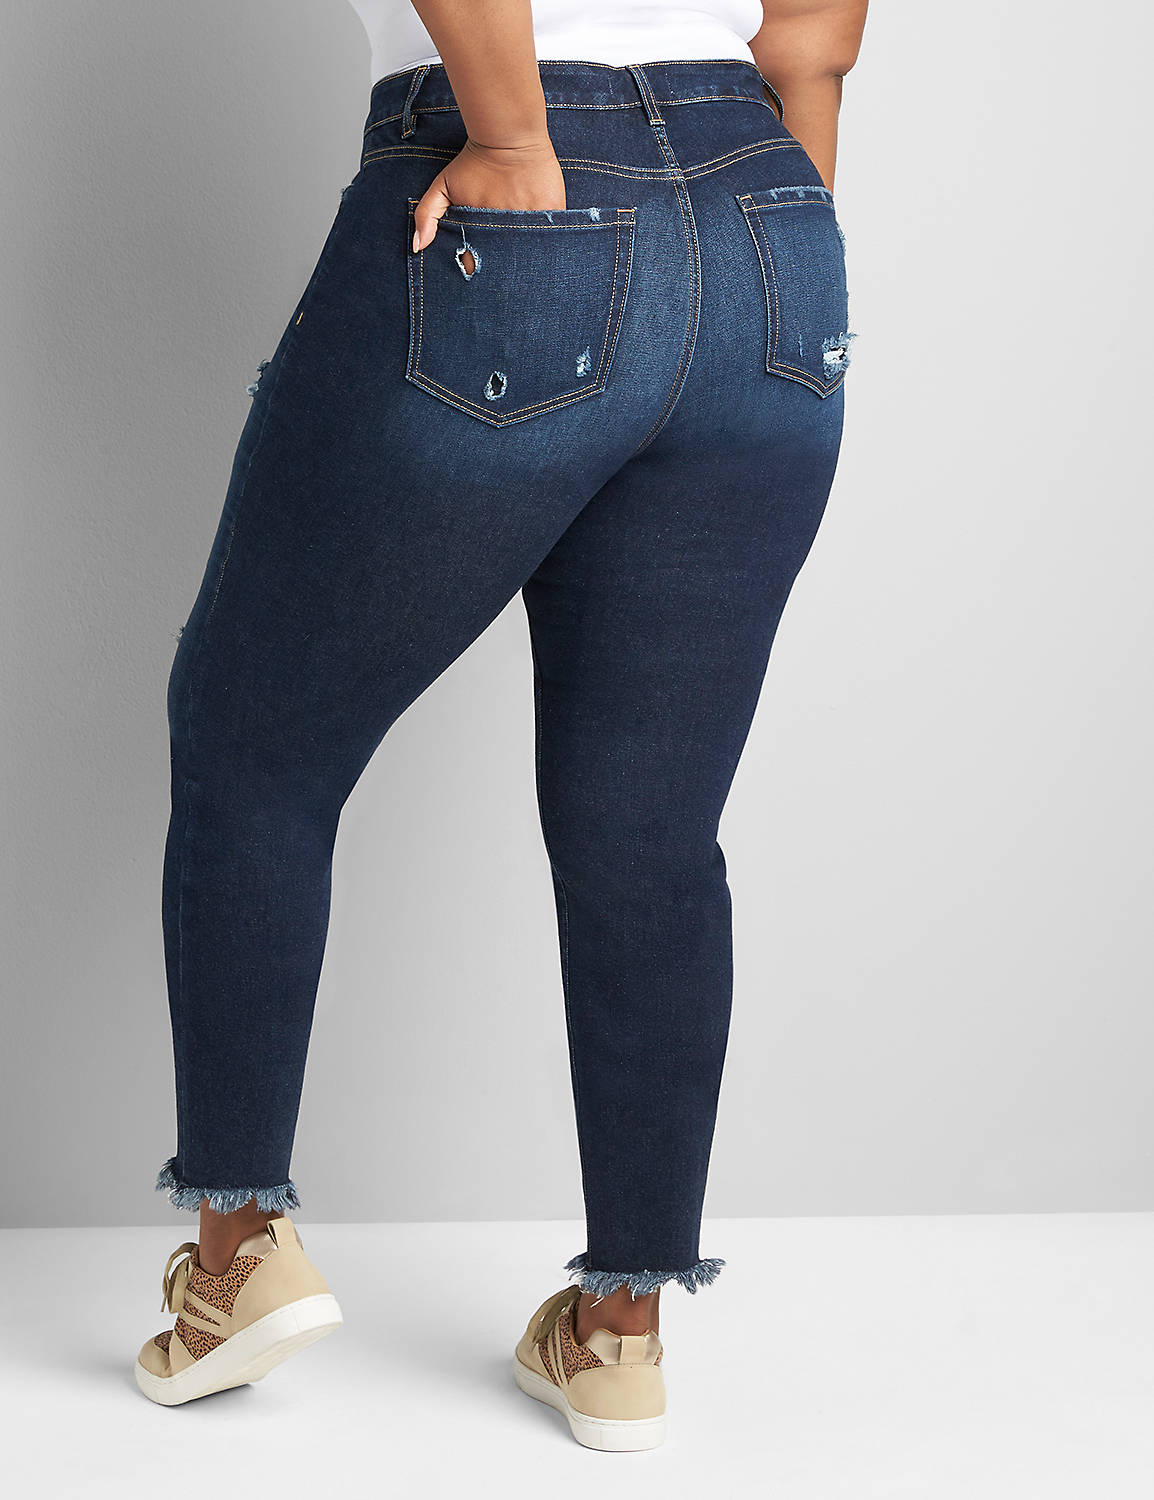 Curvy Fit High-Rise Skinny Jean Product Image 2